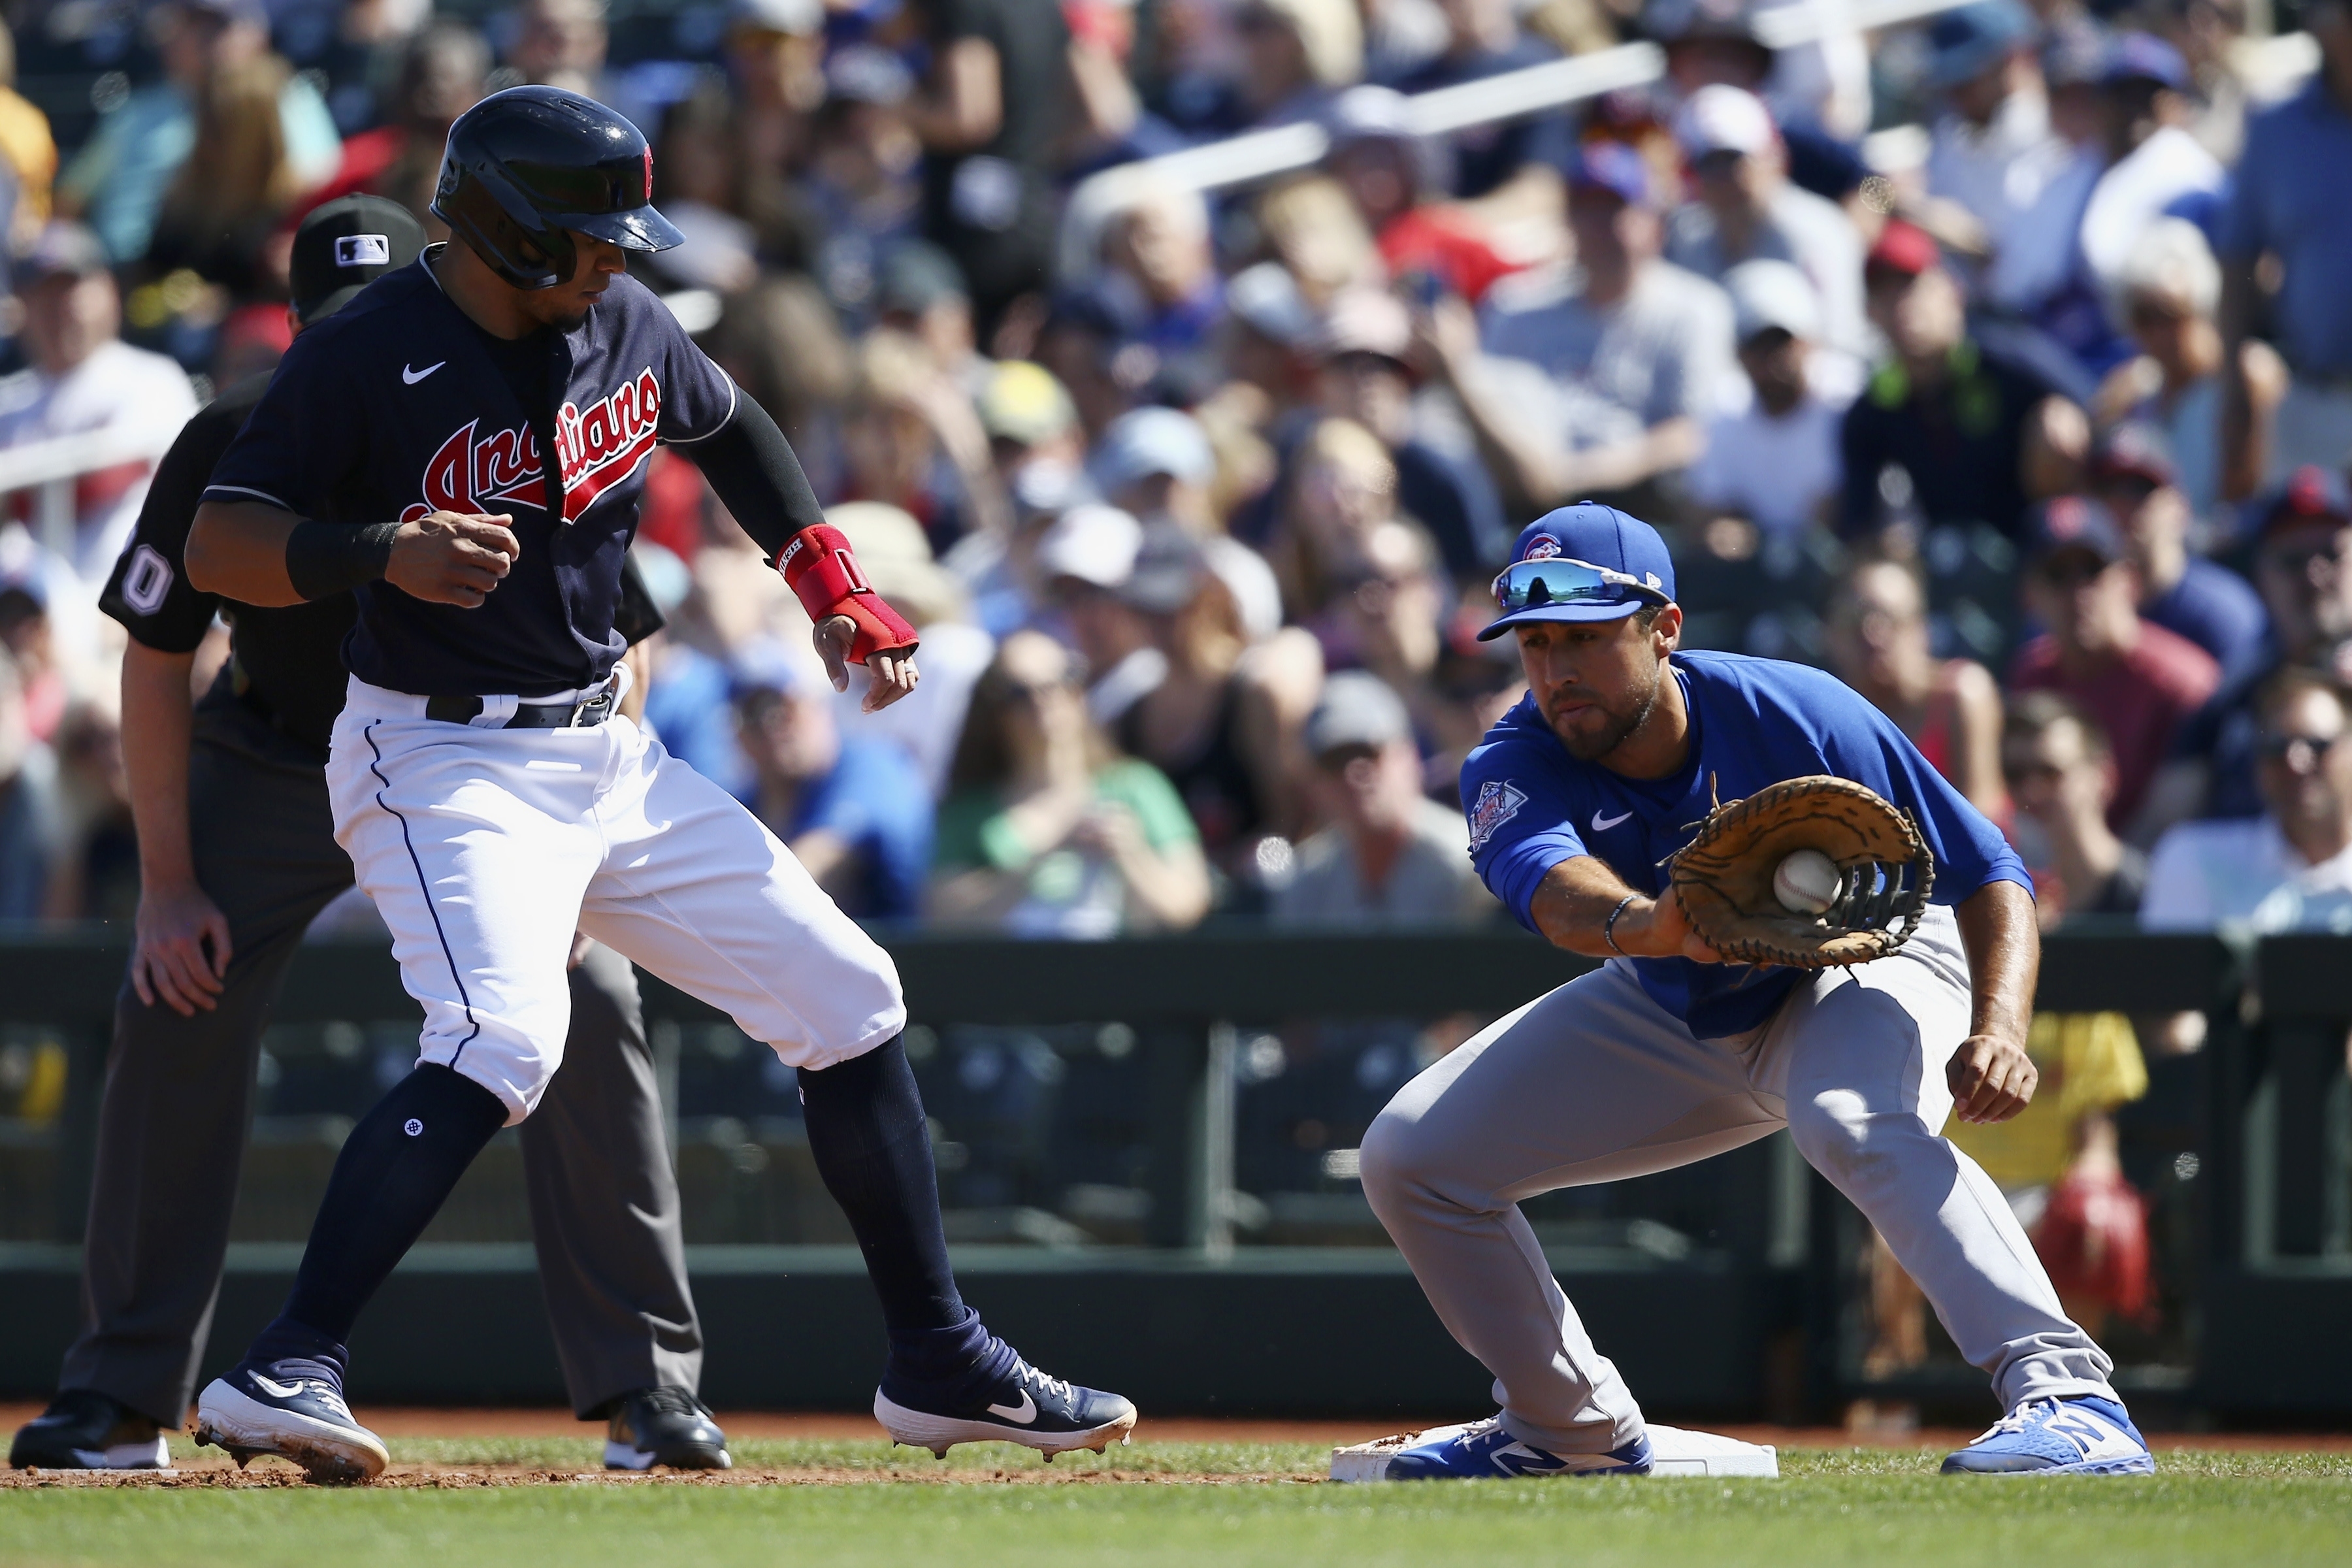 Cleveland Indians vs. Chicago Cubs spring training, March 7, 2020